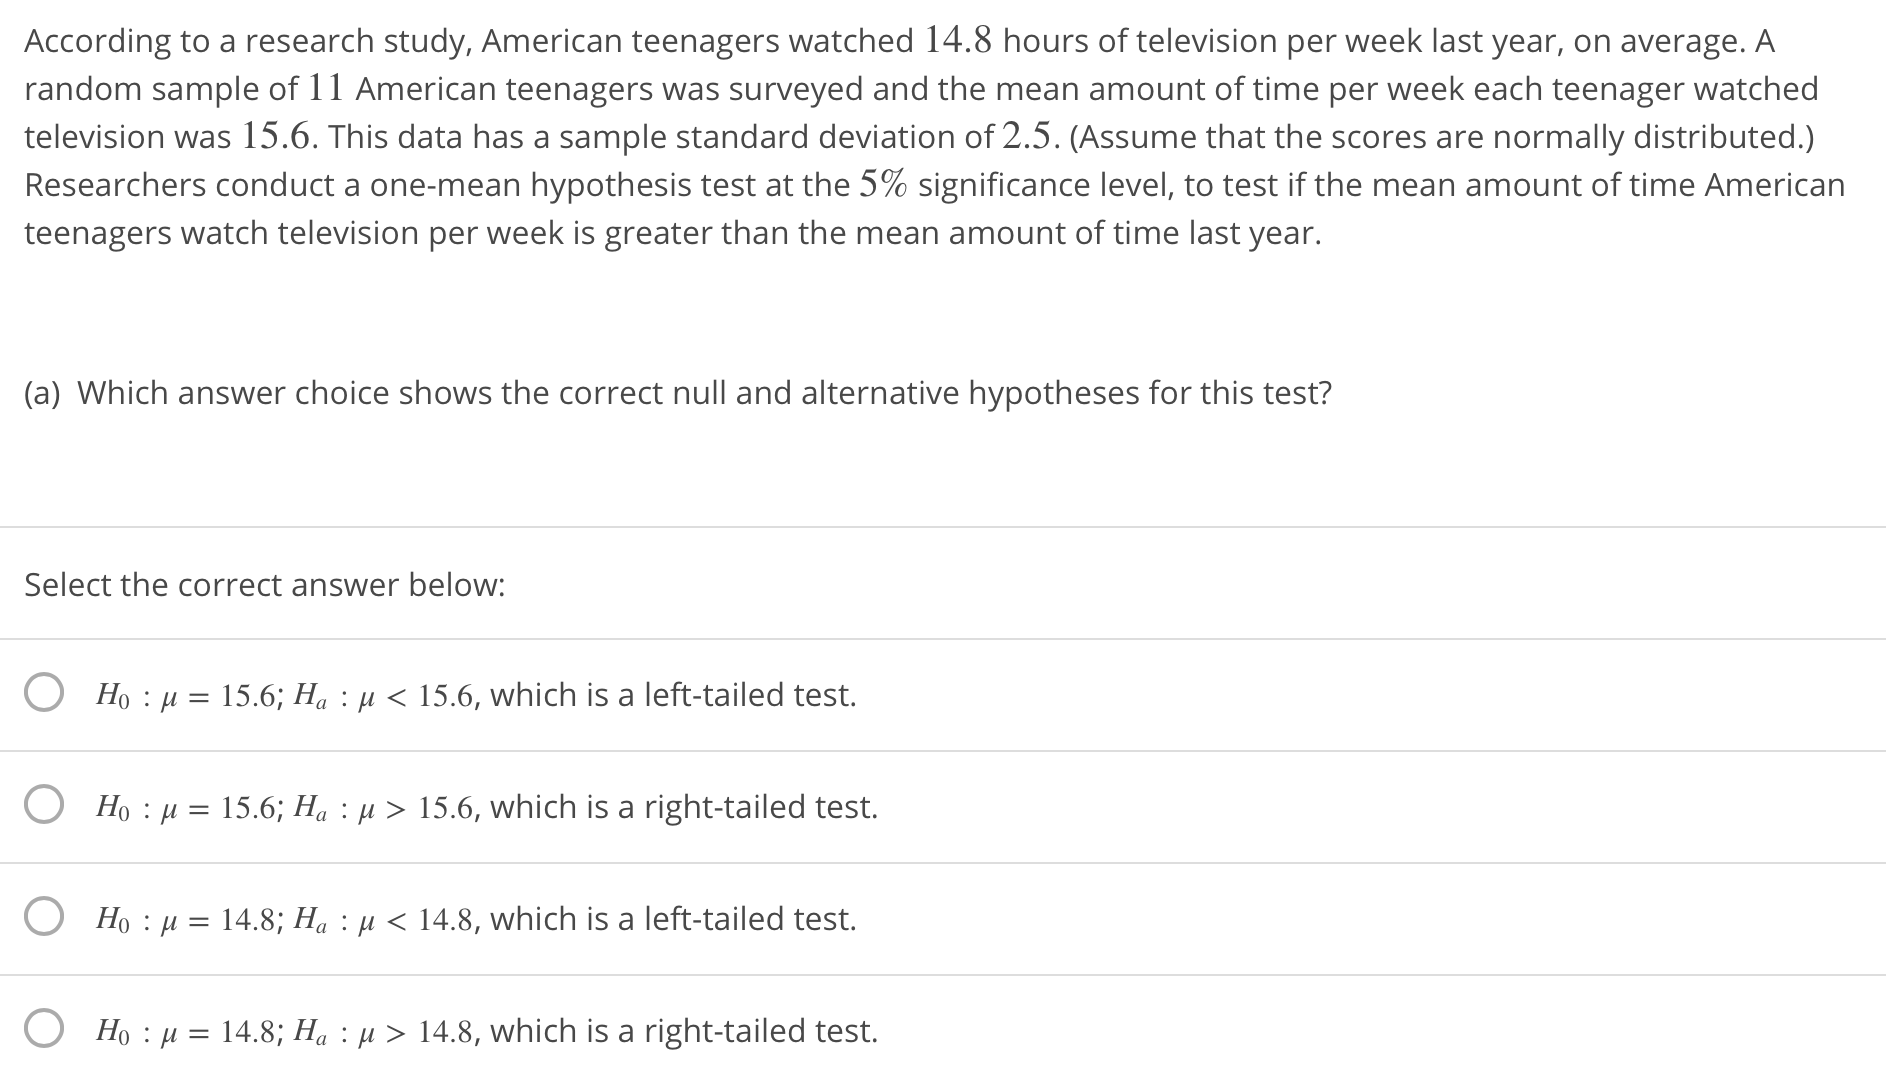 According to a research study, American teenagers watched 14.8 hours of television per week last year, on average. A
random sample of 11 American teenagers was surveyed and the mean amount of time per week each teenager watched
television was 15.6. This data has a sample standard deviation of 2.5. (Assume that the scores are normally distributed.)
Researchers conduct a one-mean hypothesis test at the 5% significance level, to test if the mean amount of time American
teenagers watch television per week is greater than the mean amount of time last year.
(a) Which answer choice shows the correct null and alternative hypotheses for this test?
Select the correct answer below:
O
O
O
O
Ho : μ-15.6; Ha : μ < 15.6, which is a left-tailed test.
Ho : μ = 15.6; Ha : μ 〉 15.6, which is a right-tailed test.
Ho : μ
Ho : μ-14.8: Ha : μ 14.8, which is a right-tailed test.
-148: Ha : μ
14.8, which is a left-tailed test.
